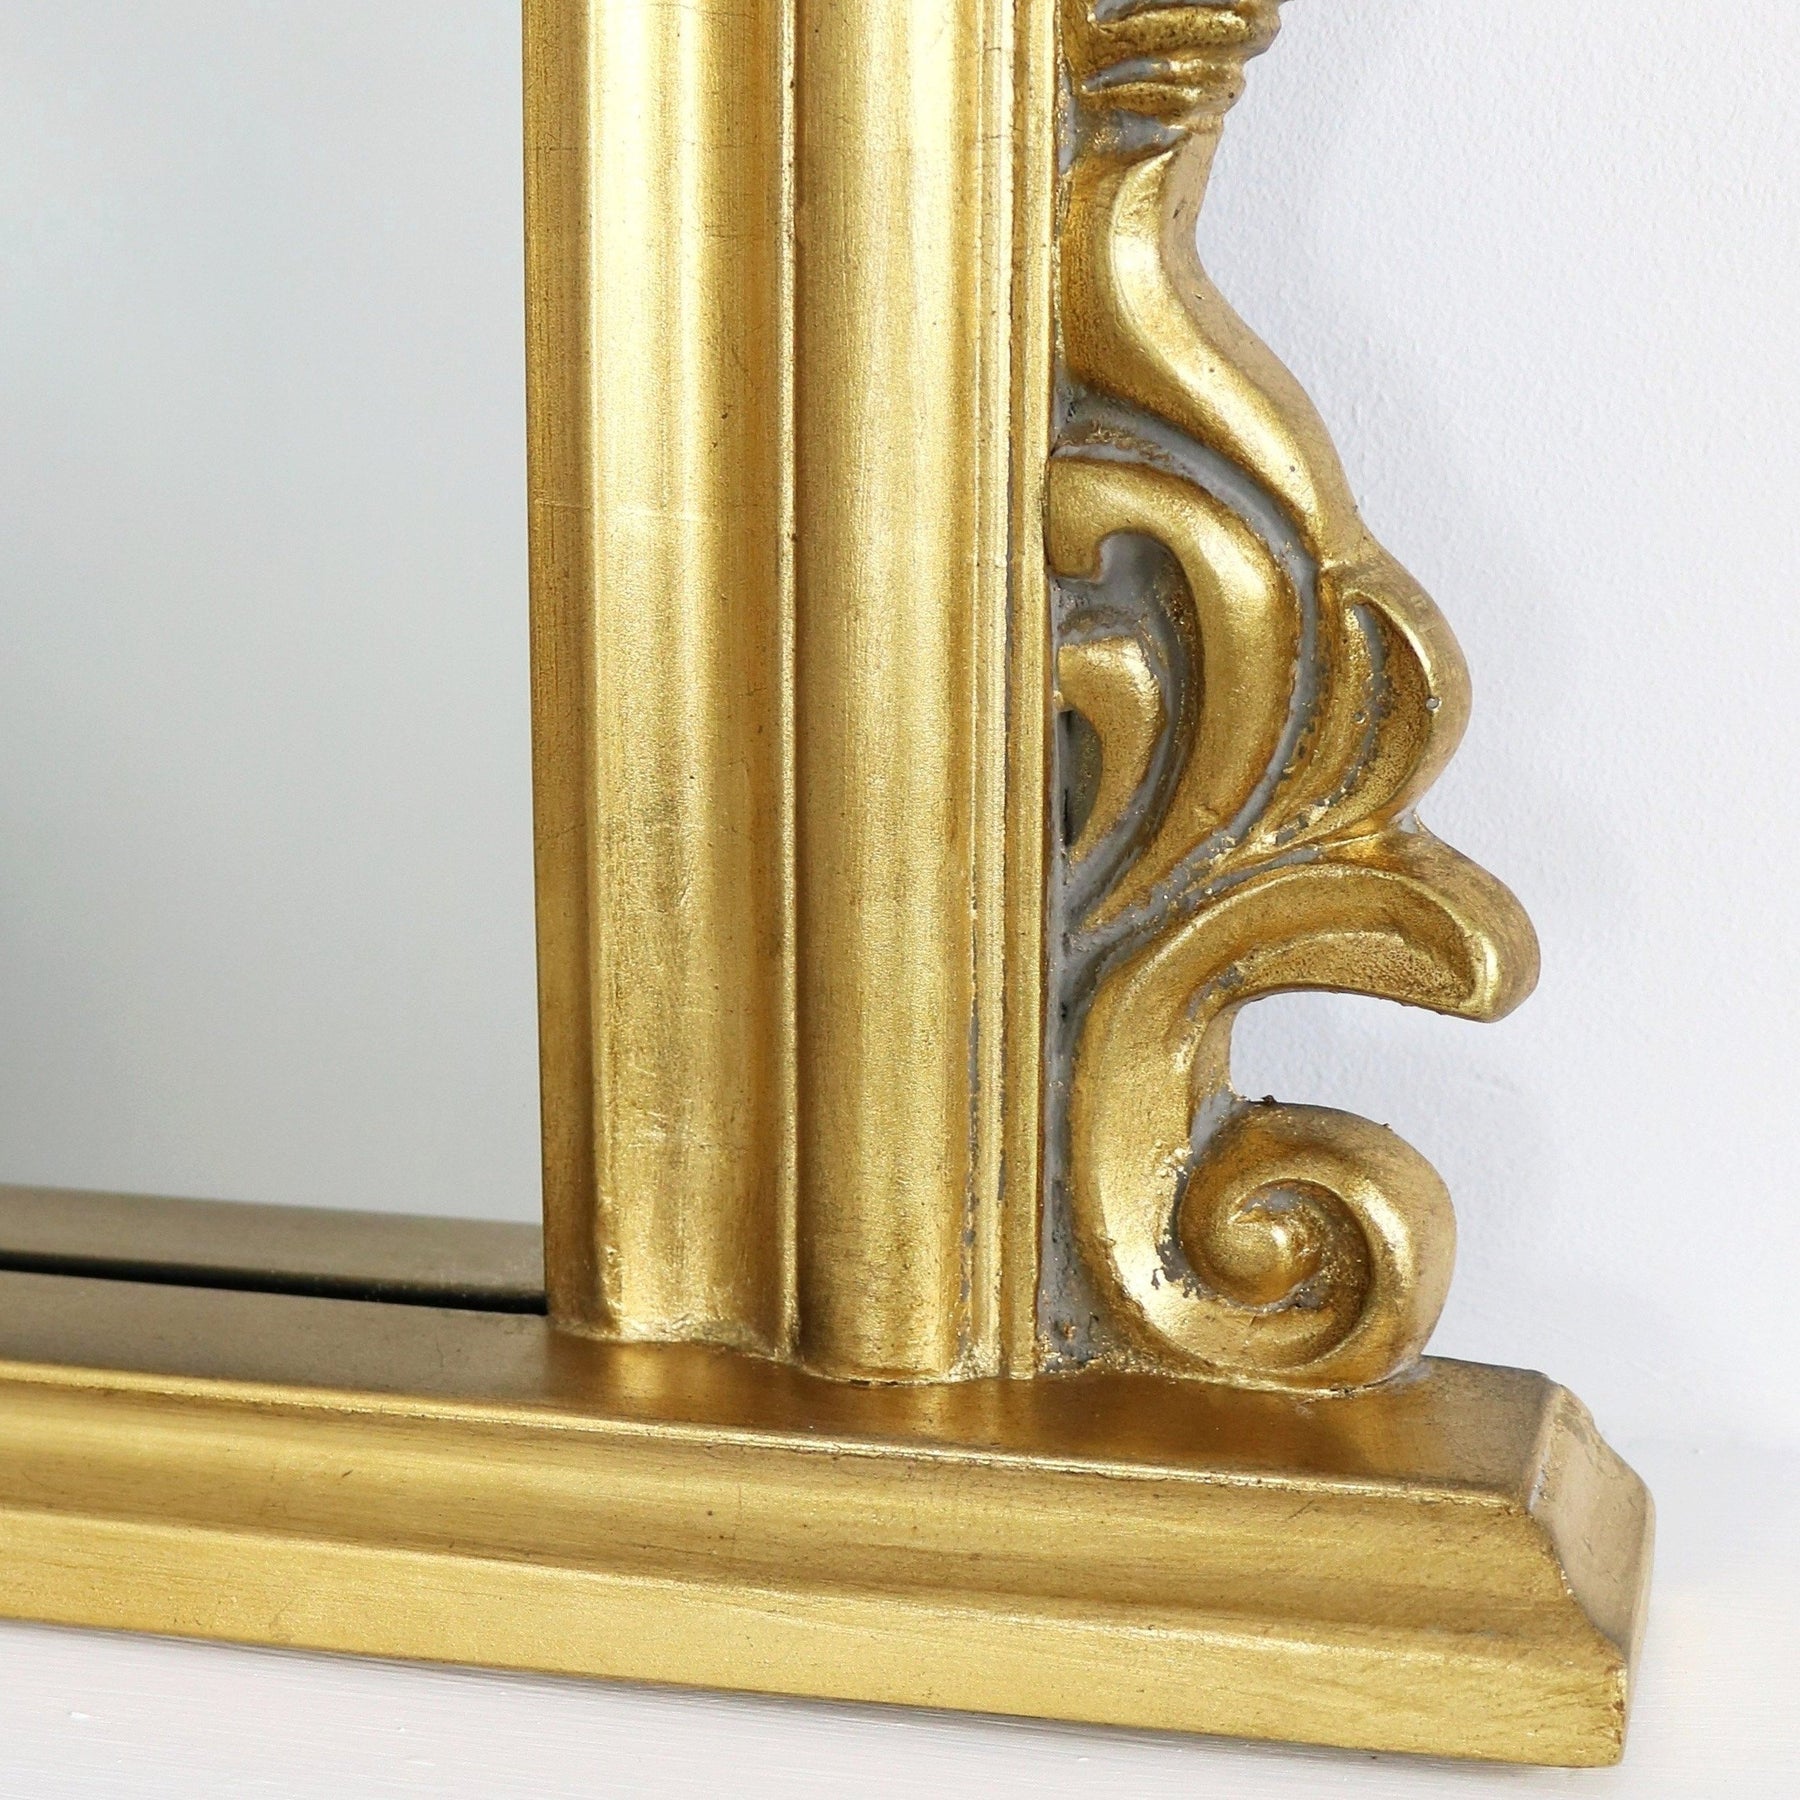 The ornate detailing of this mirrors distinctive border.